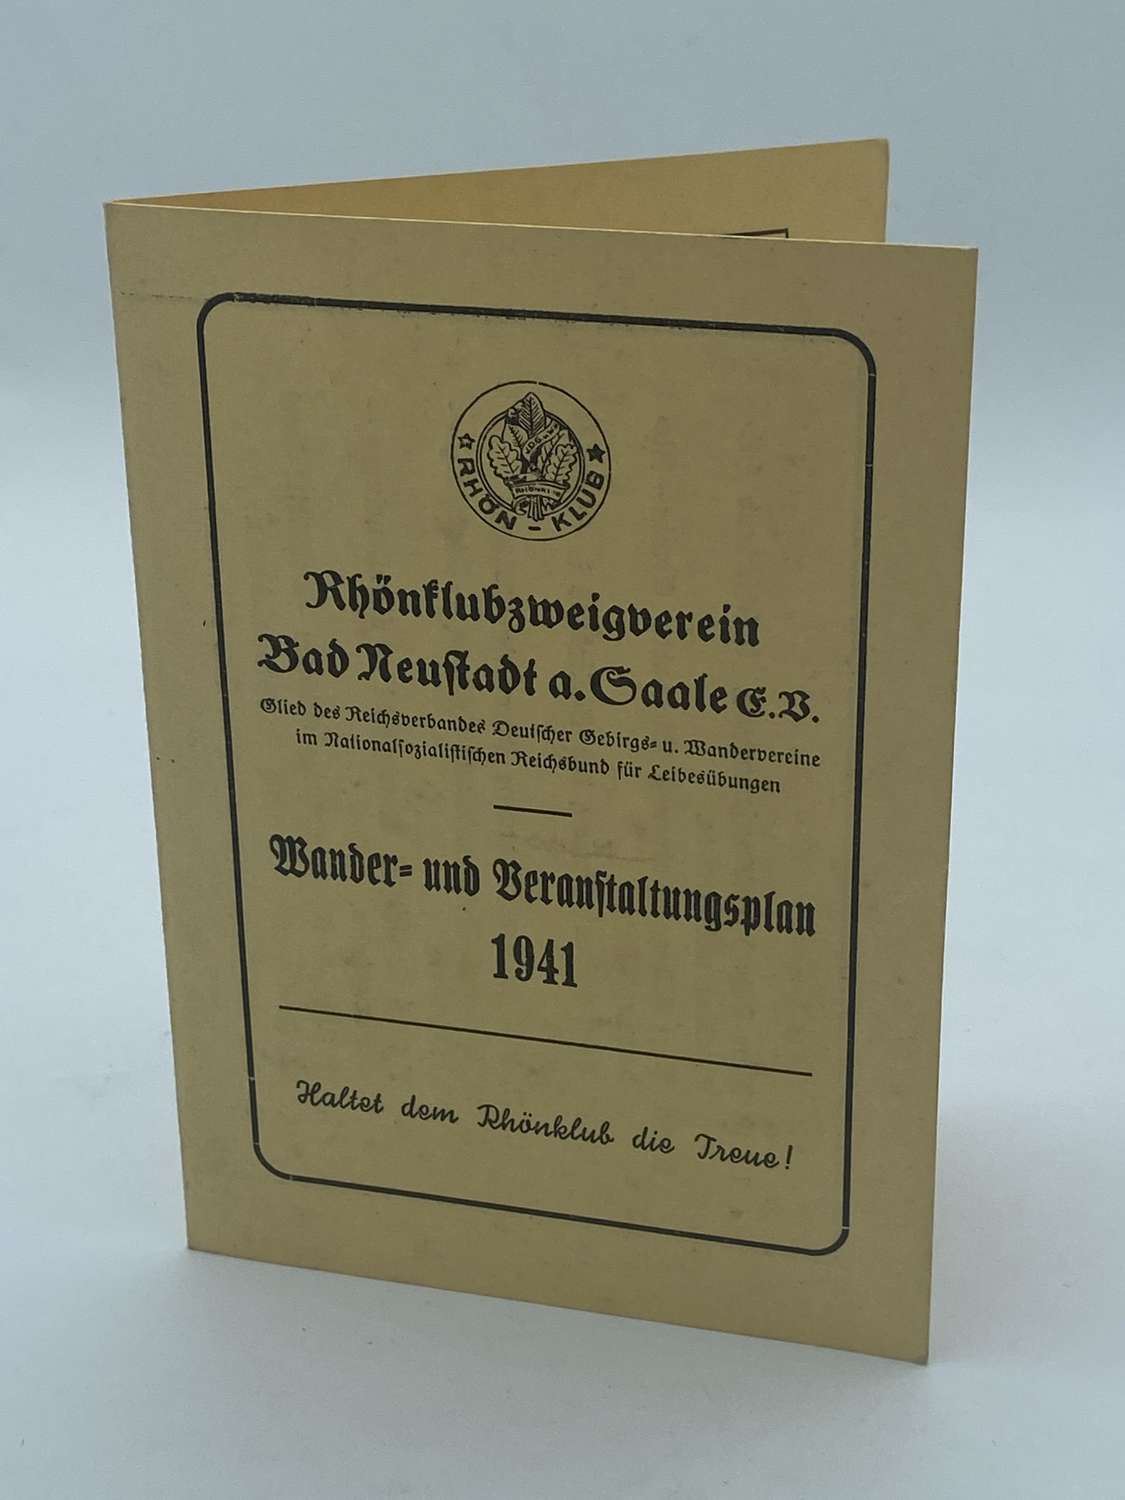 1941 Reich Association of German Mountain and Hiking Associations Card